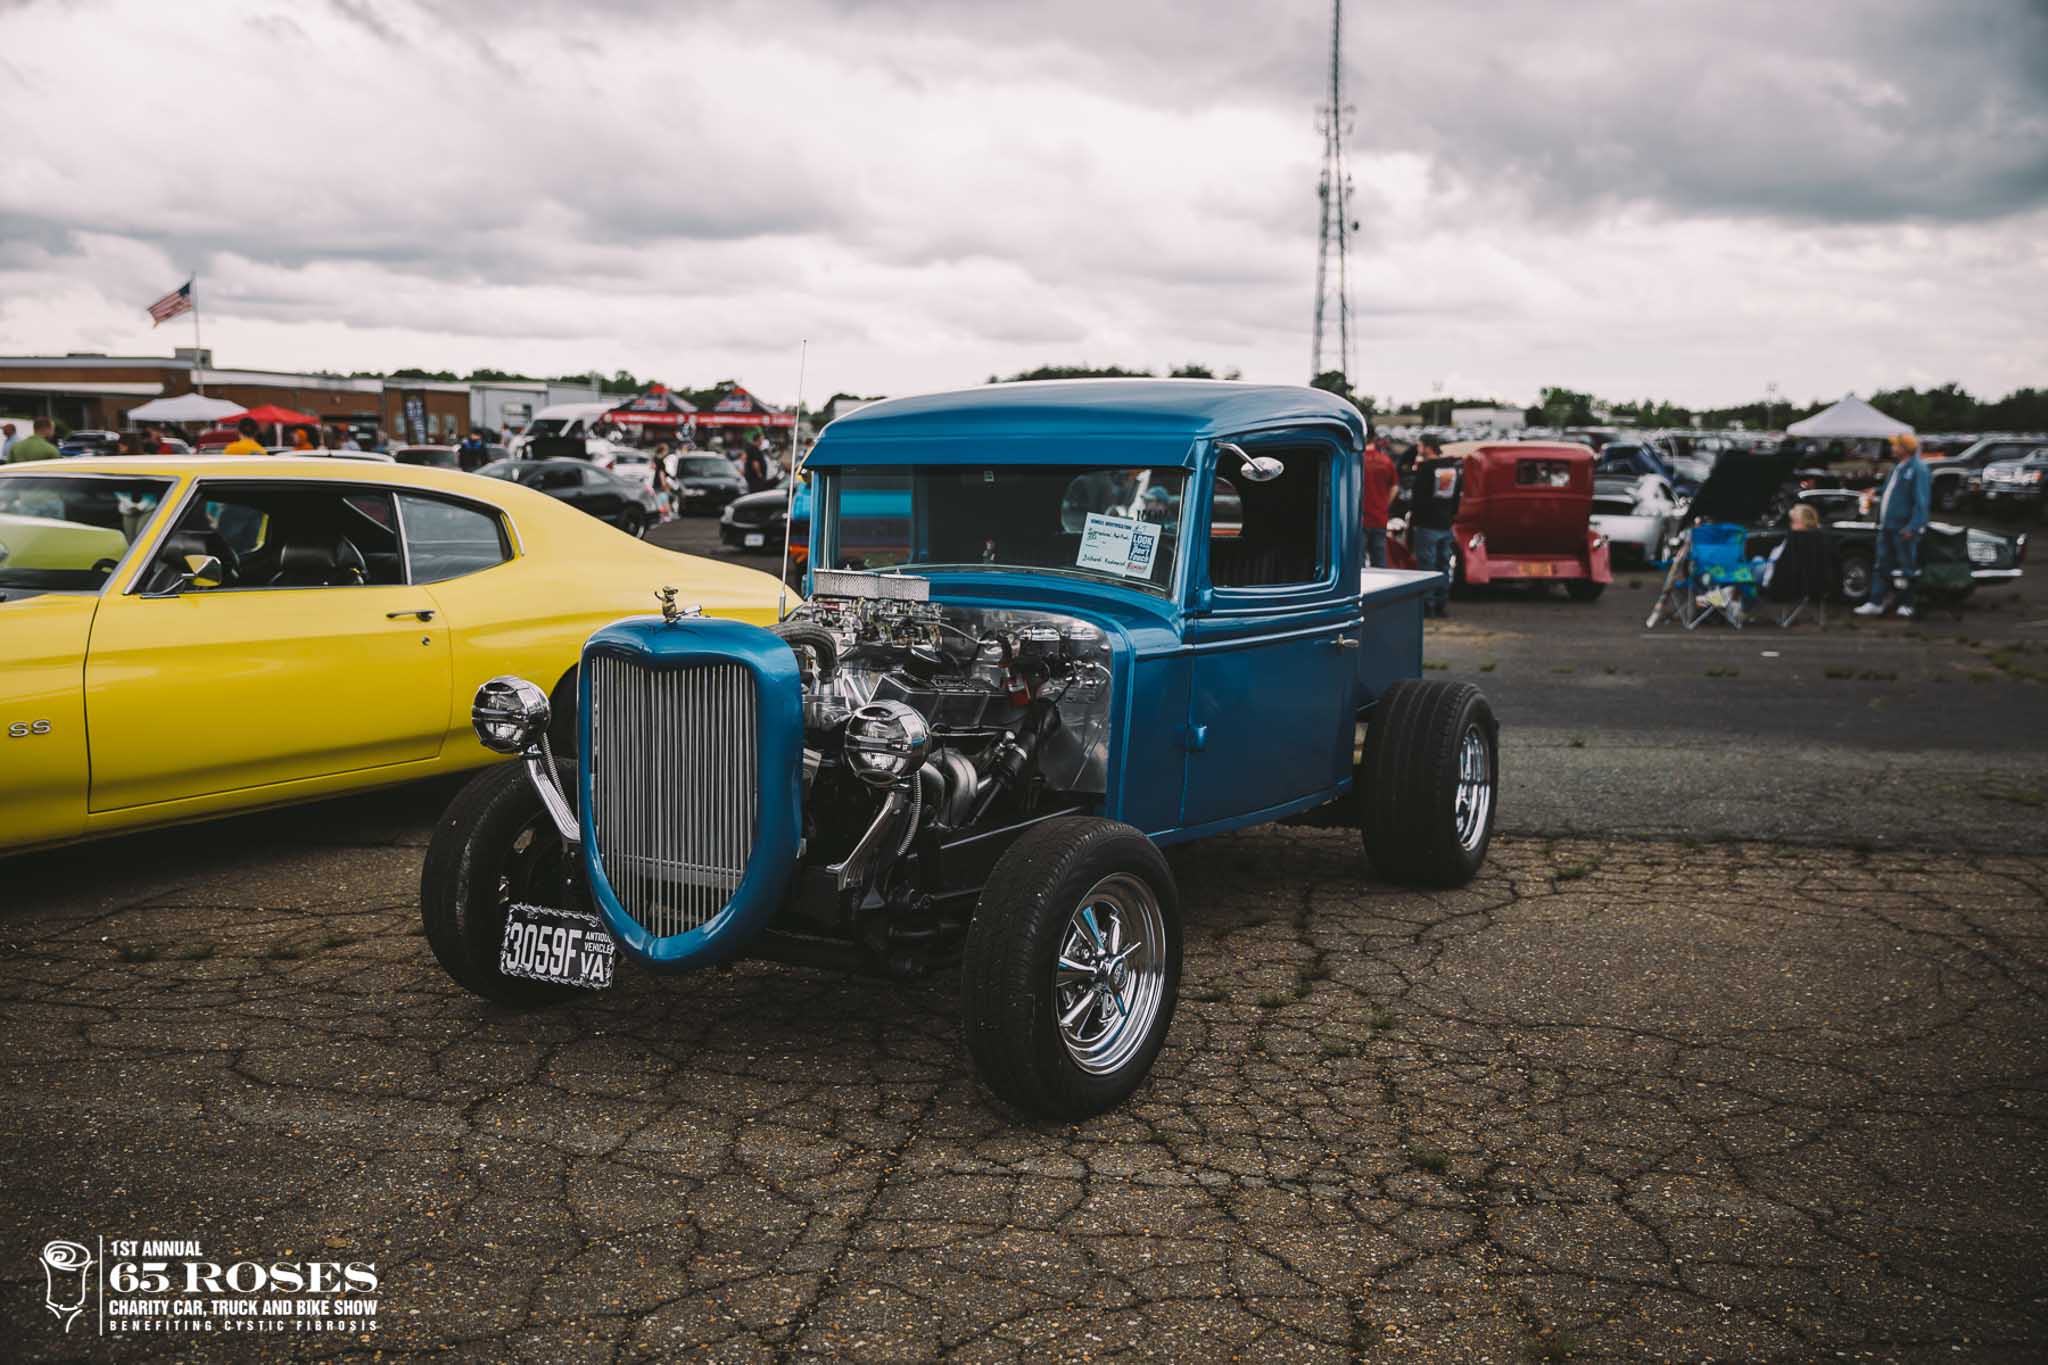 1st Annual 65 Roses Car Show benefiting Cystic Fibrosis